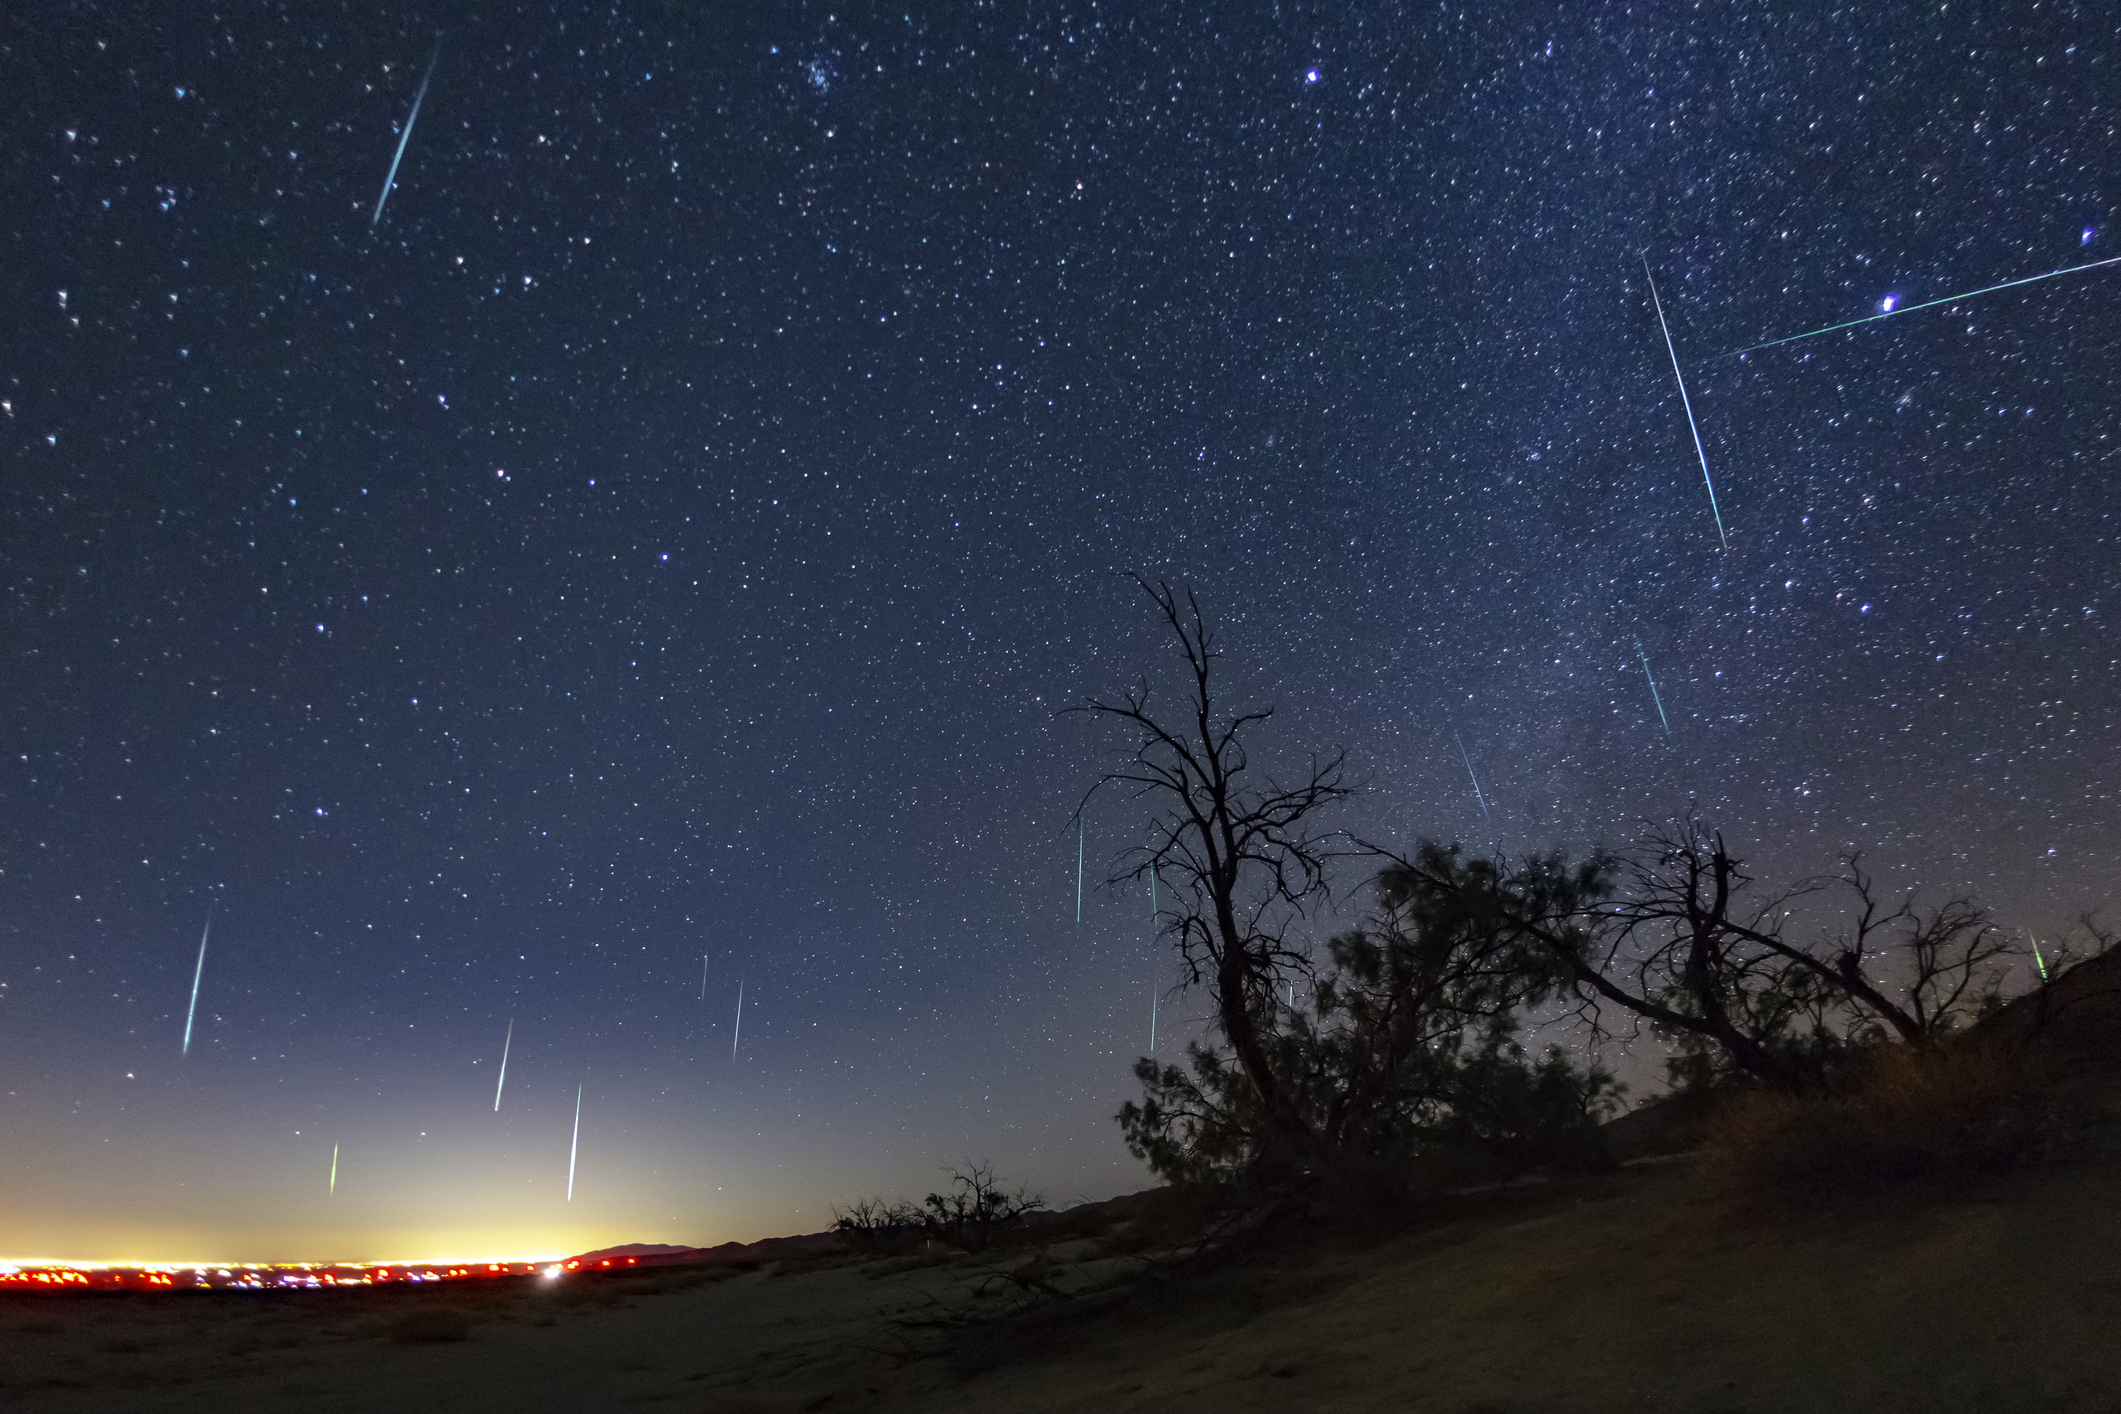 Geminid meteor shower most active in night of December 13